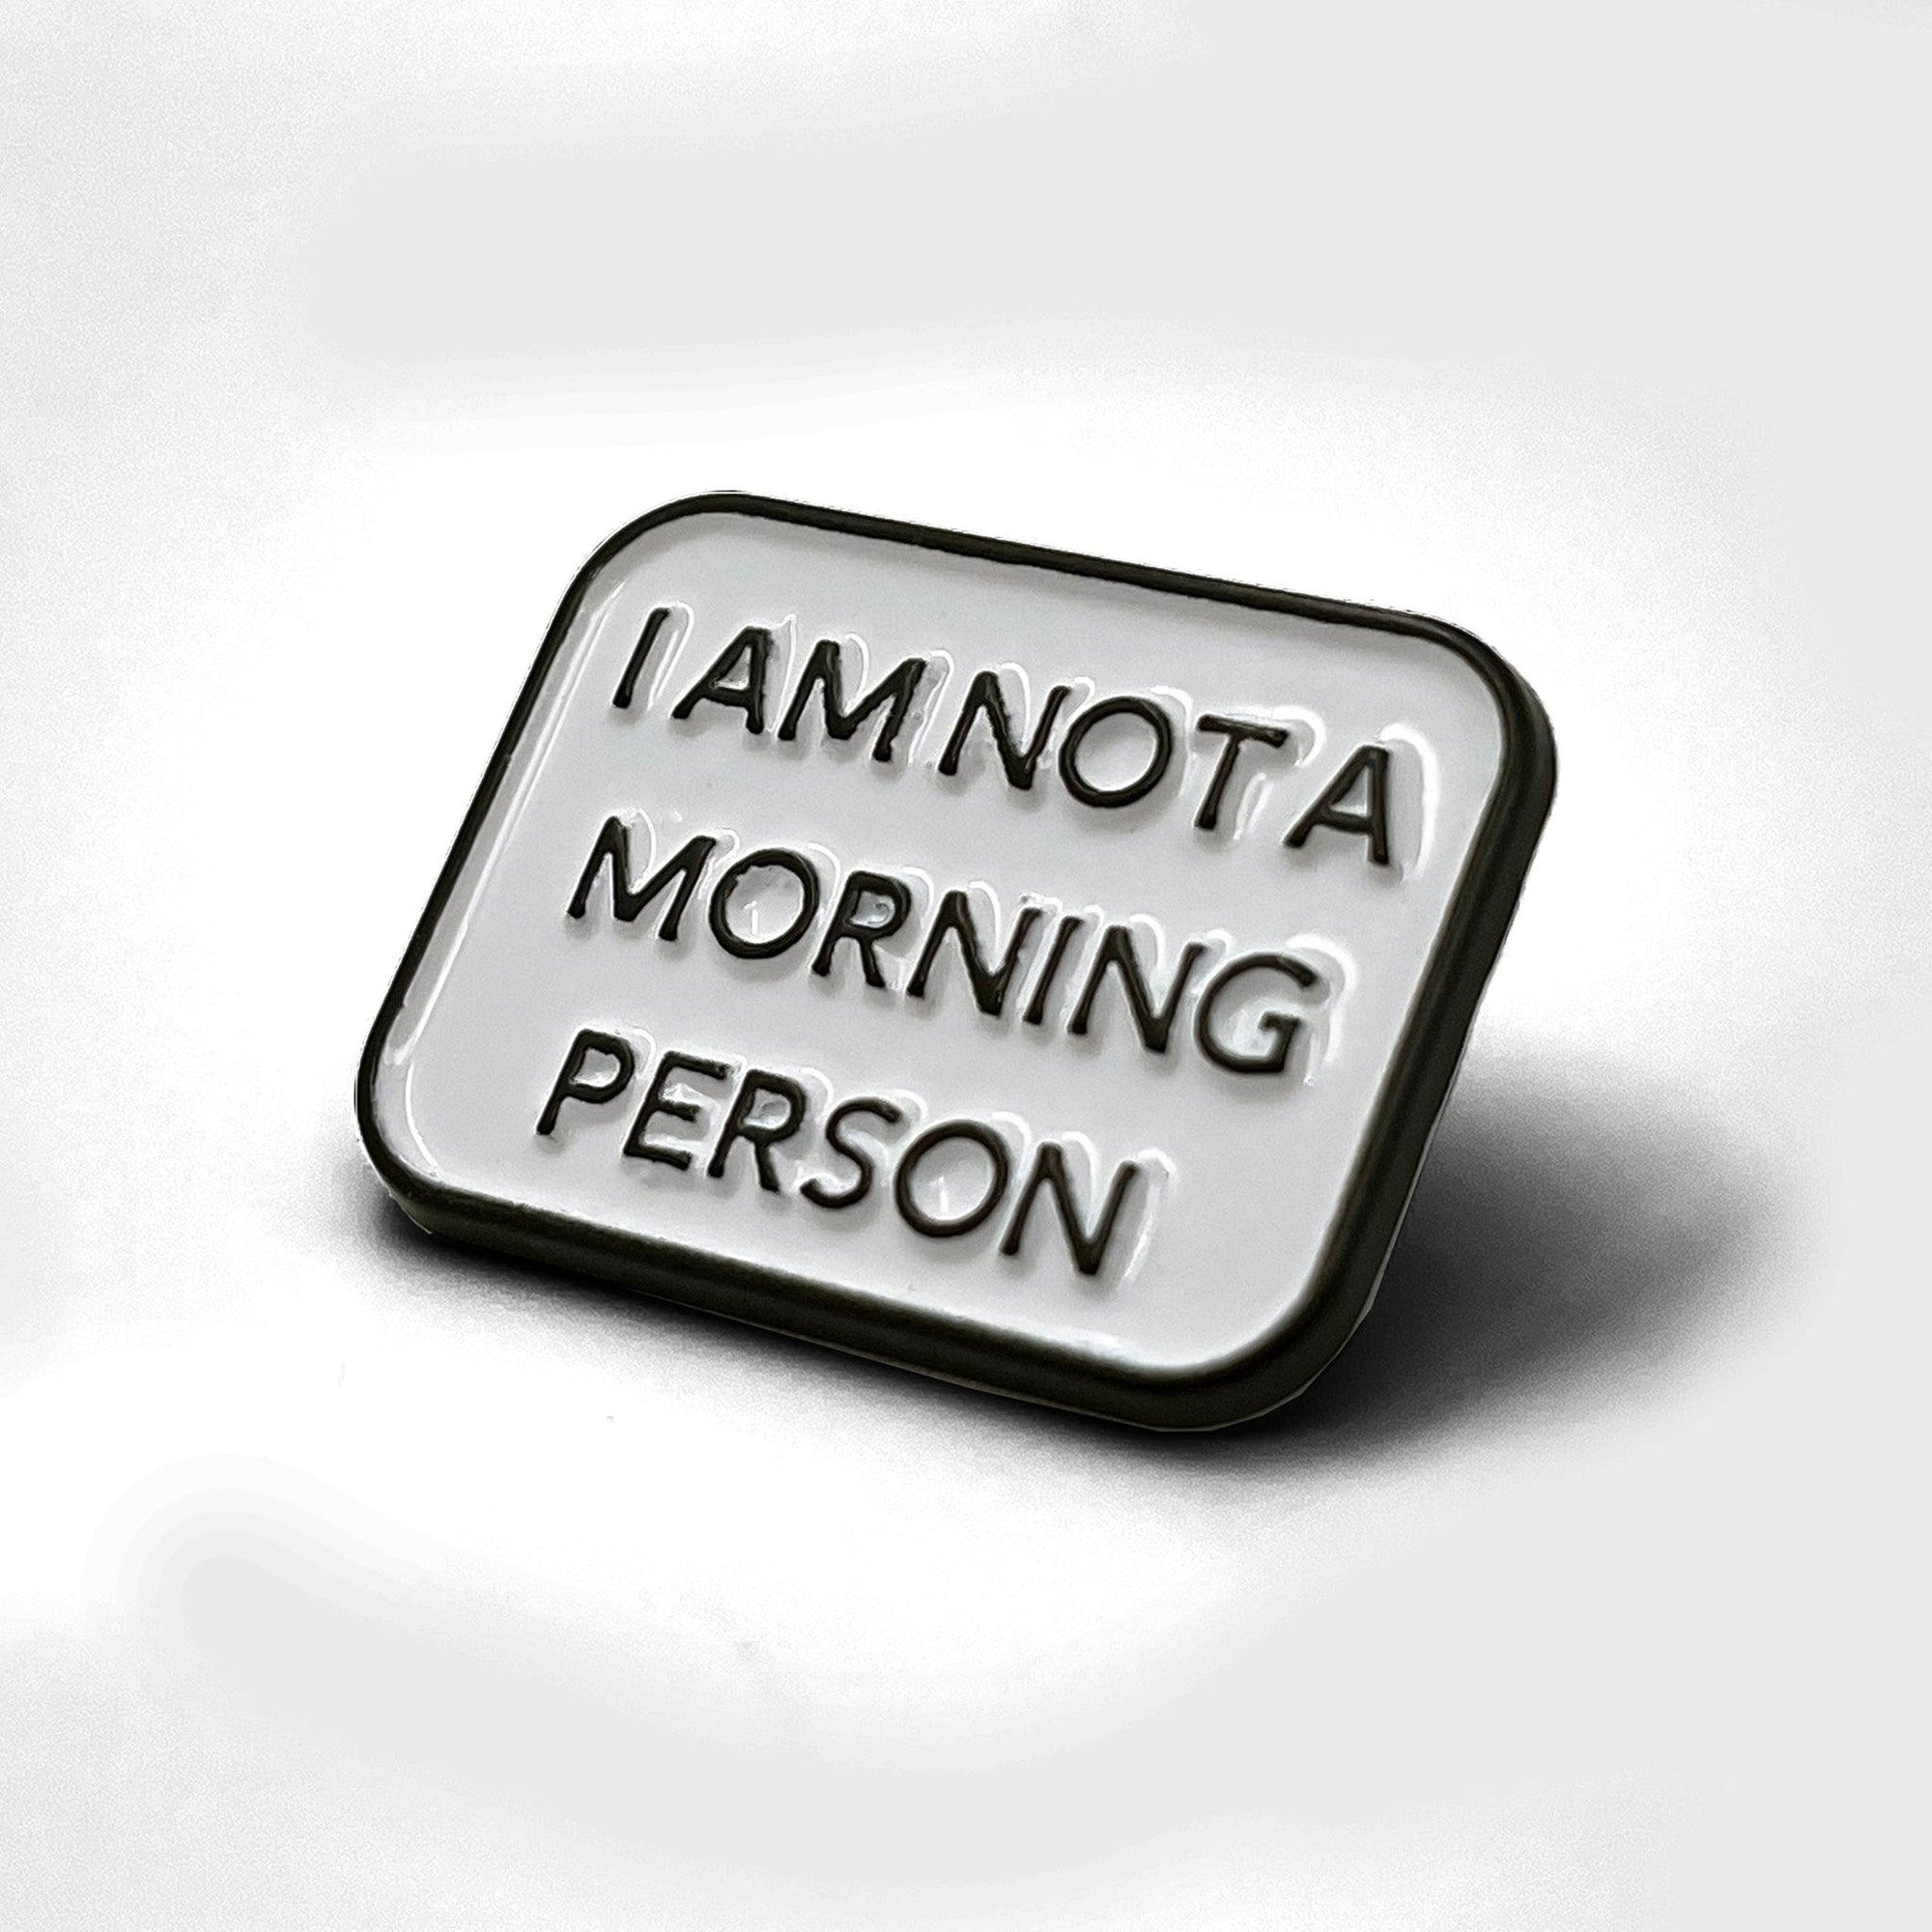 I Am Not A Morning Person Enamel Pin - No System